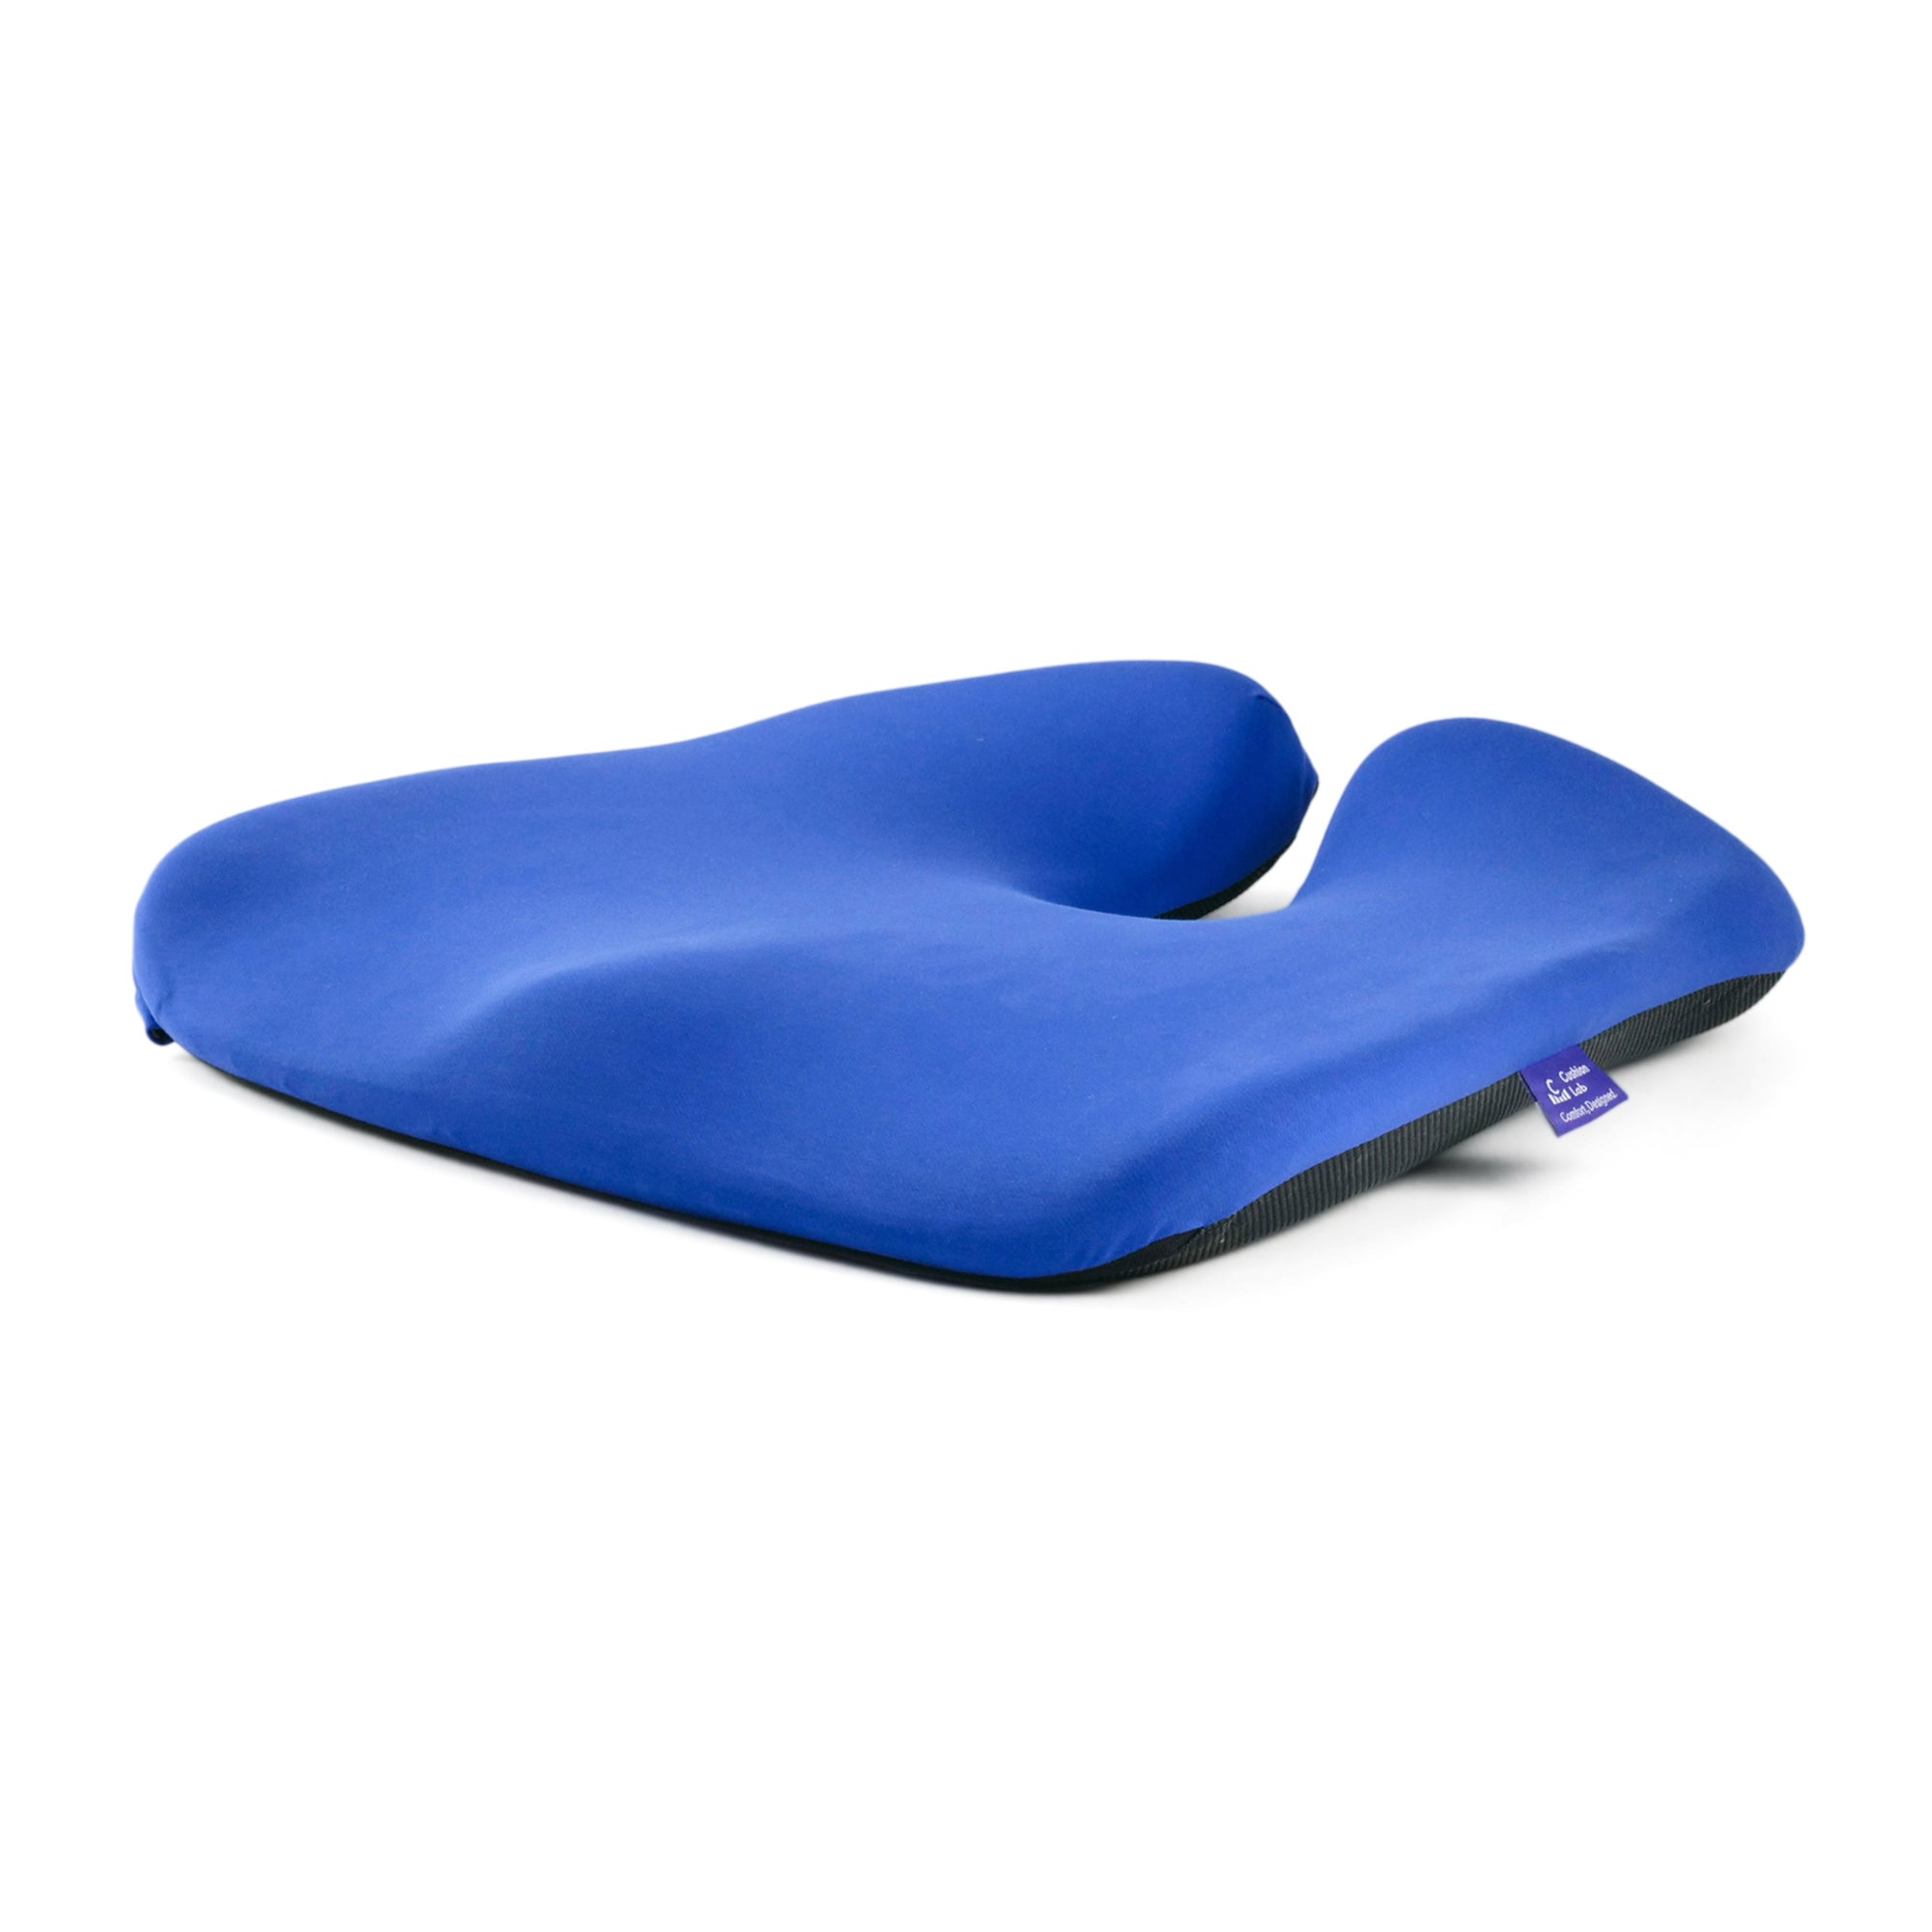 Cushion Lab Lumbar Pillow and Seat Cushion Review - Will I Keep or Return  Them?? 